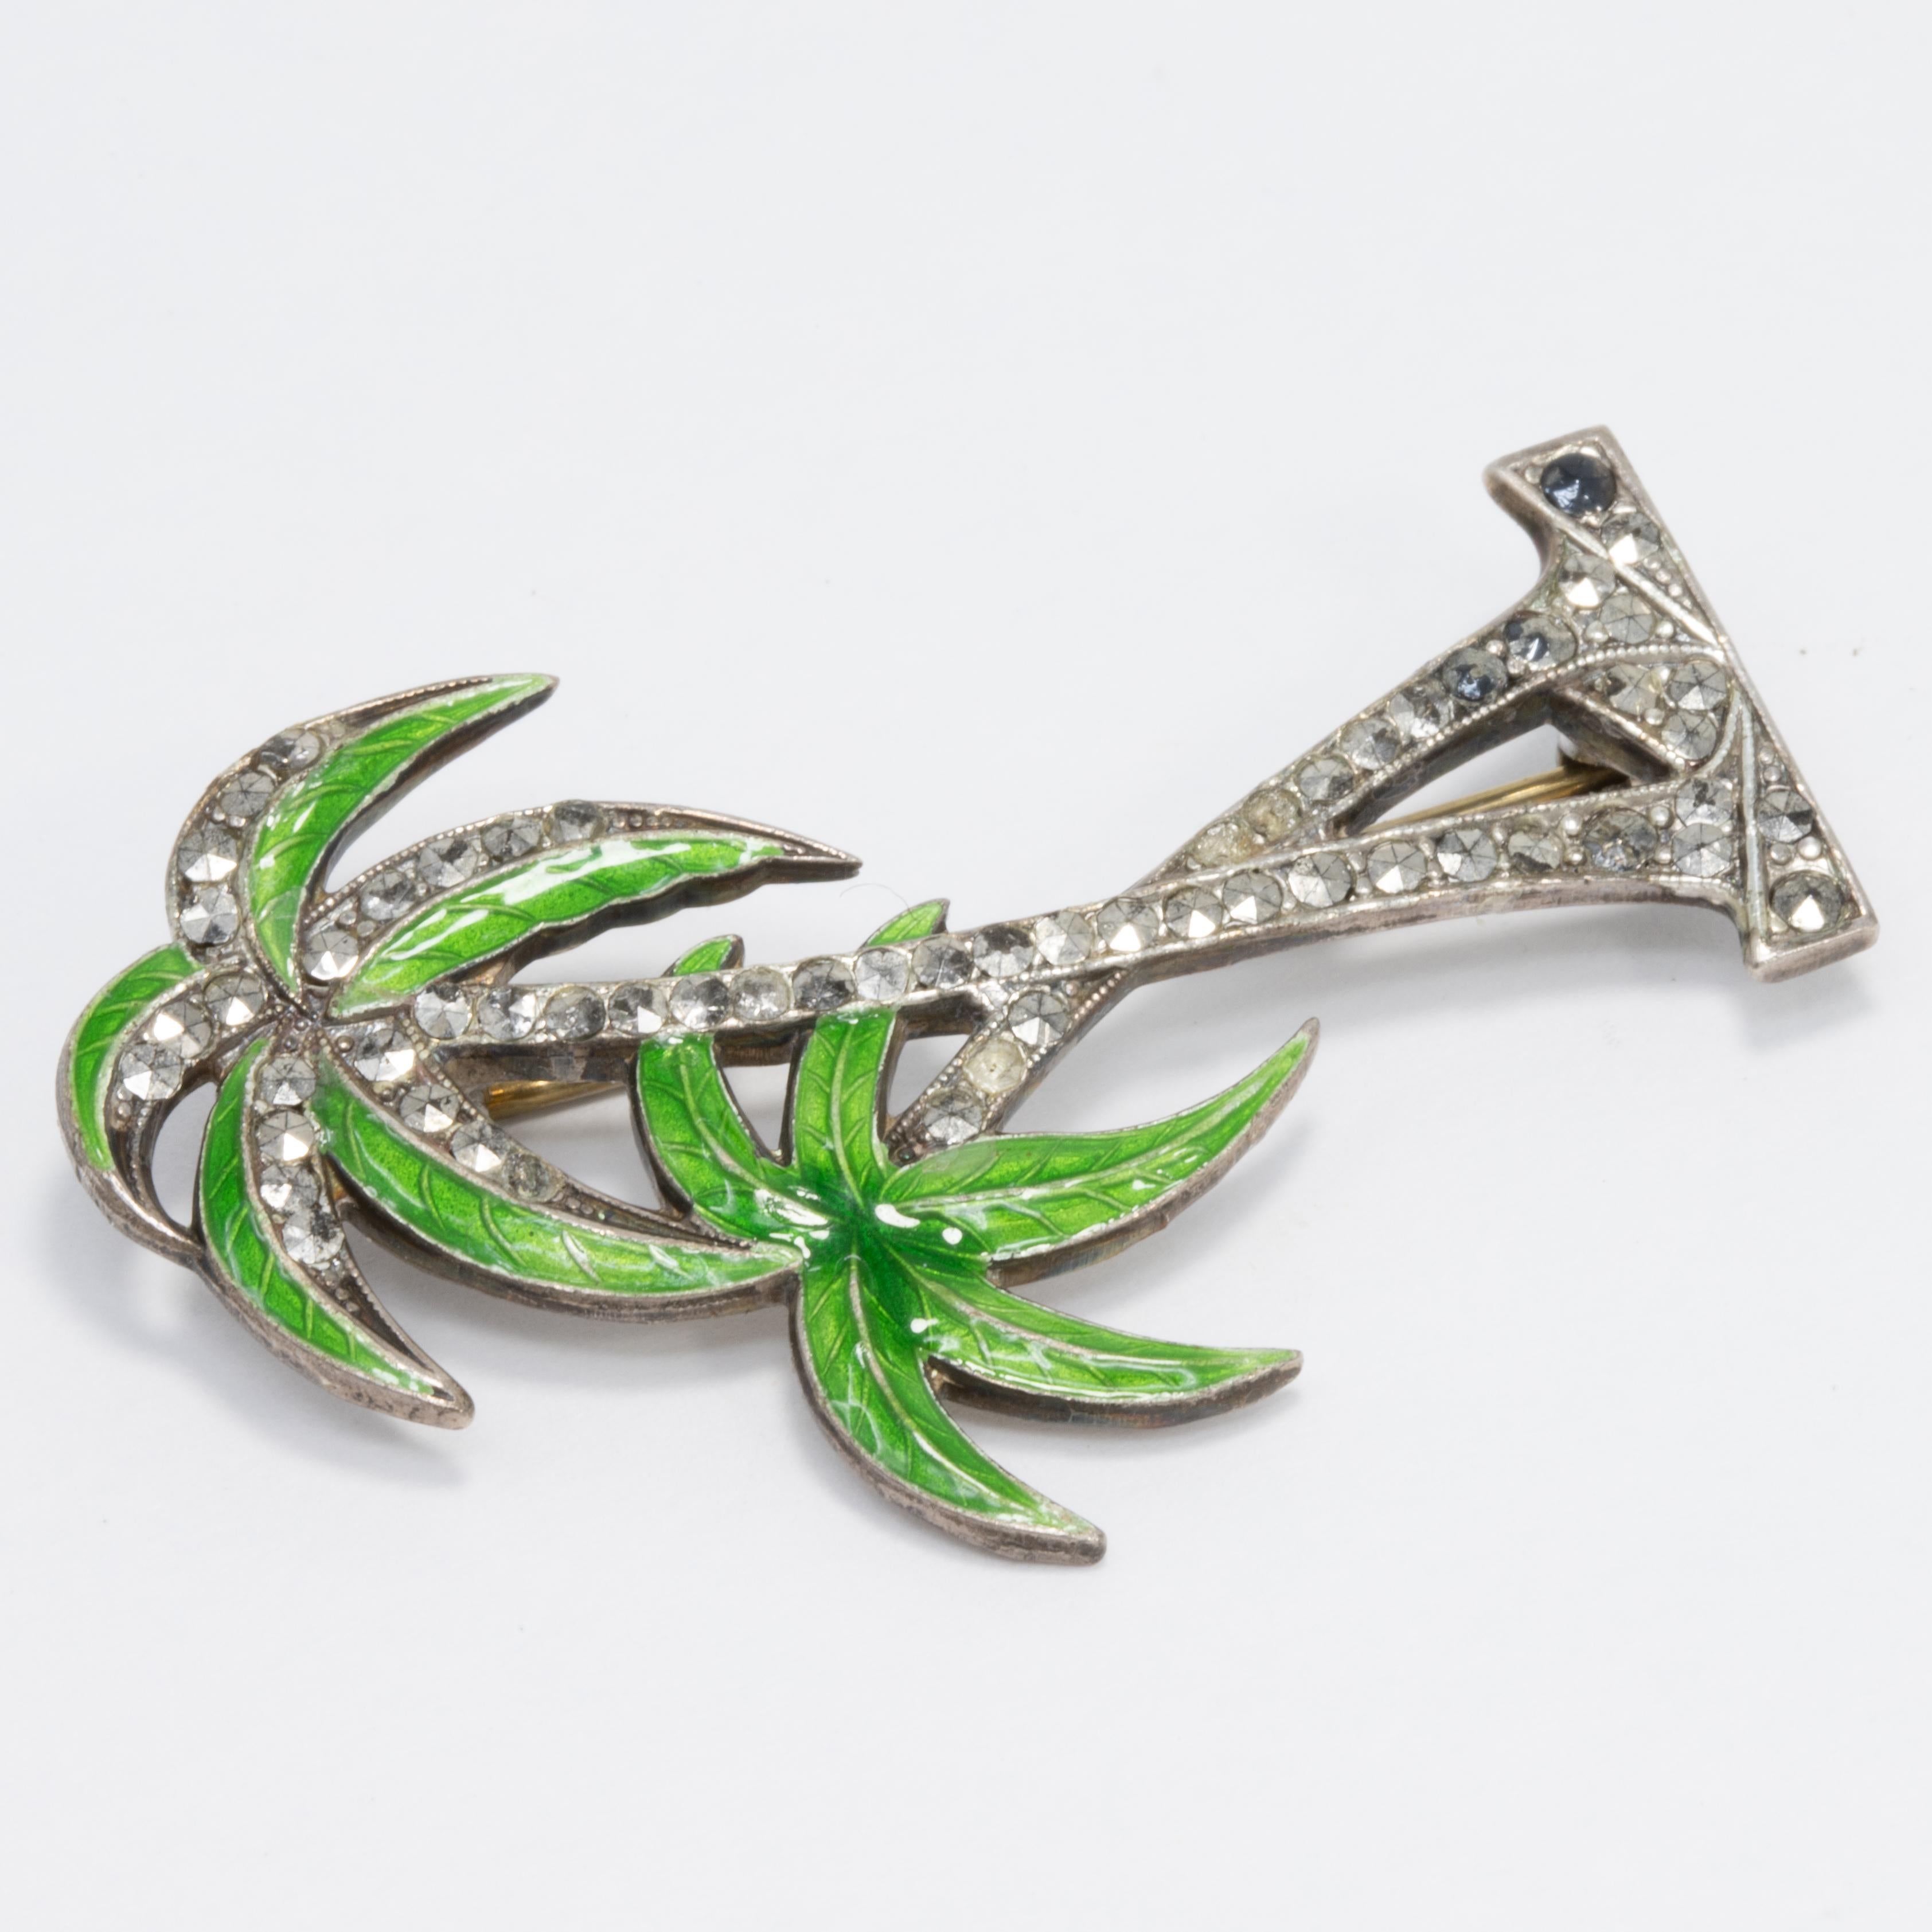 A stylish retro brooch, featuring two sterling silver palm trees painted with green enamel and decorated with marcasite crystals.

Marks / hallmarks: Sterling